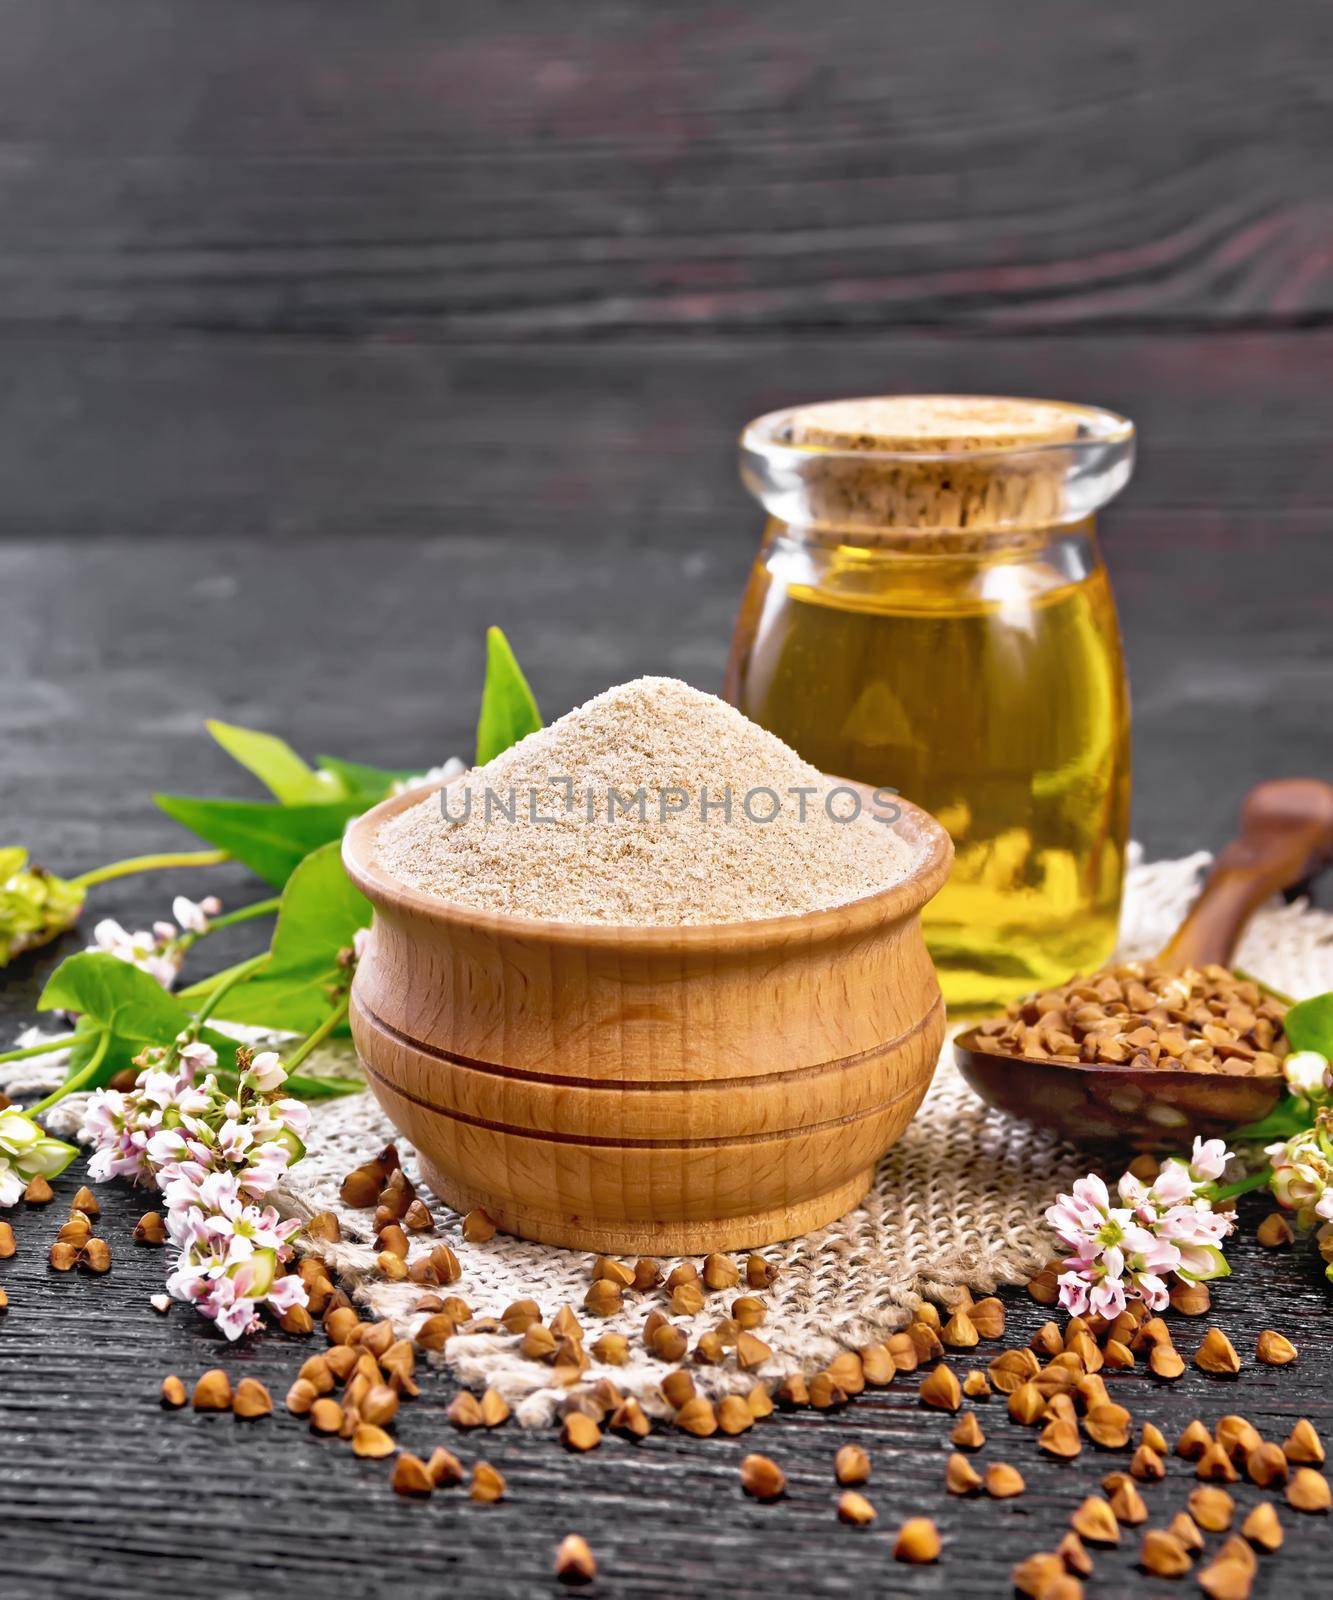 Brown buckwheat flour in a bowl, brown groats in a spoon, buckwheat flowers and leaves, oil in a glass jar on burlap on the background of dark wooden board